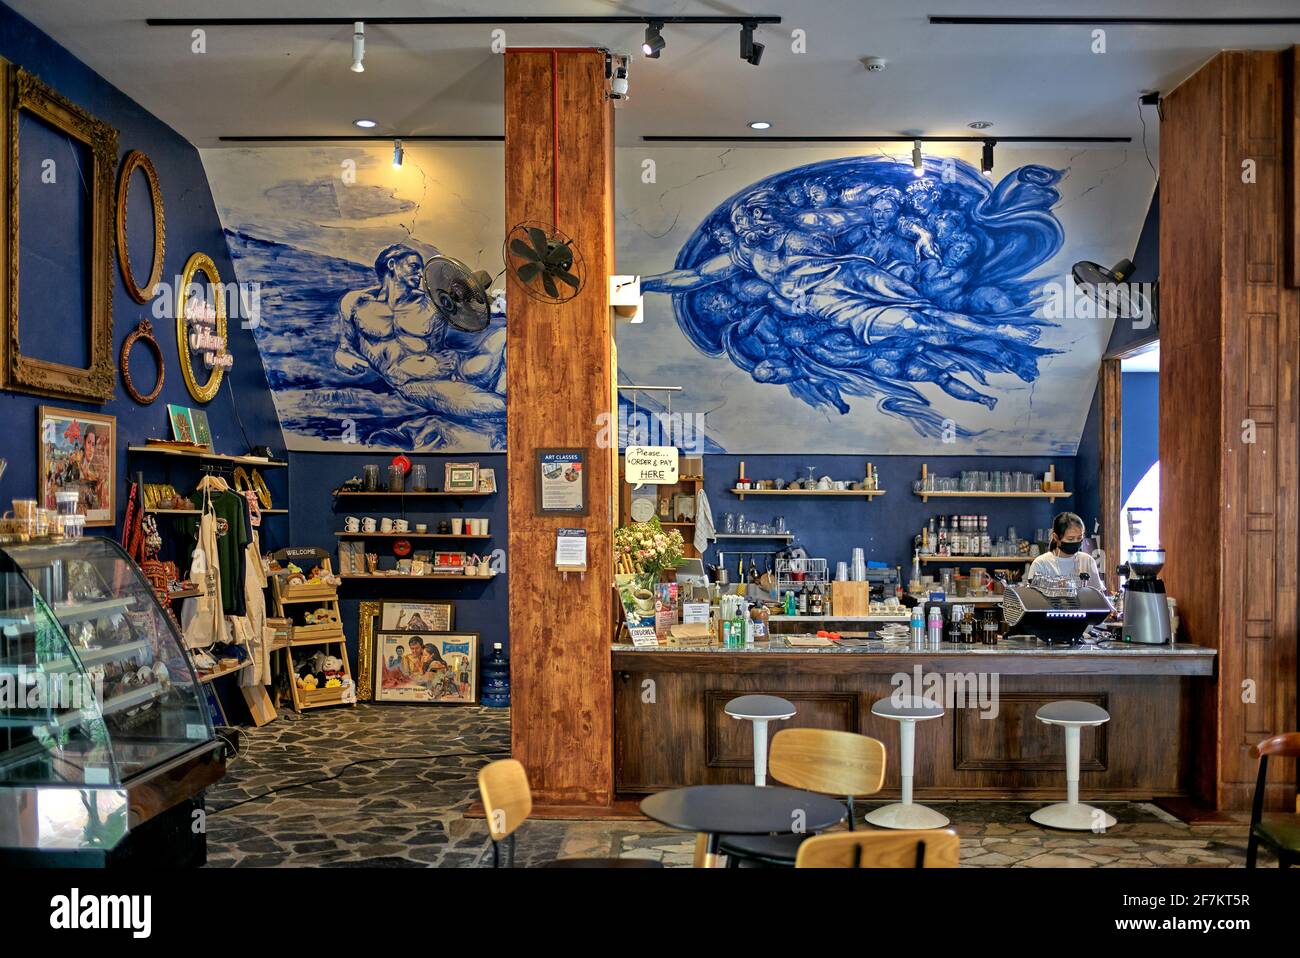 Art cafe interior with wall art of the 'Creation of Adam' masterpiece by Michelangelo Stock Photo